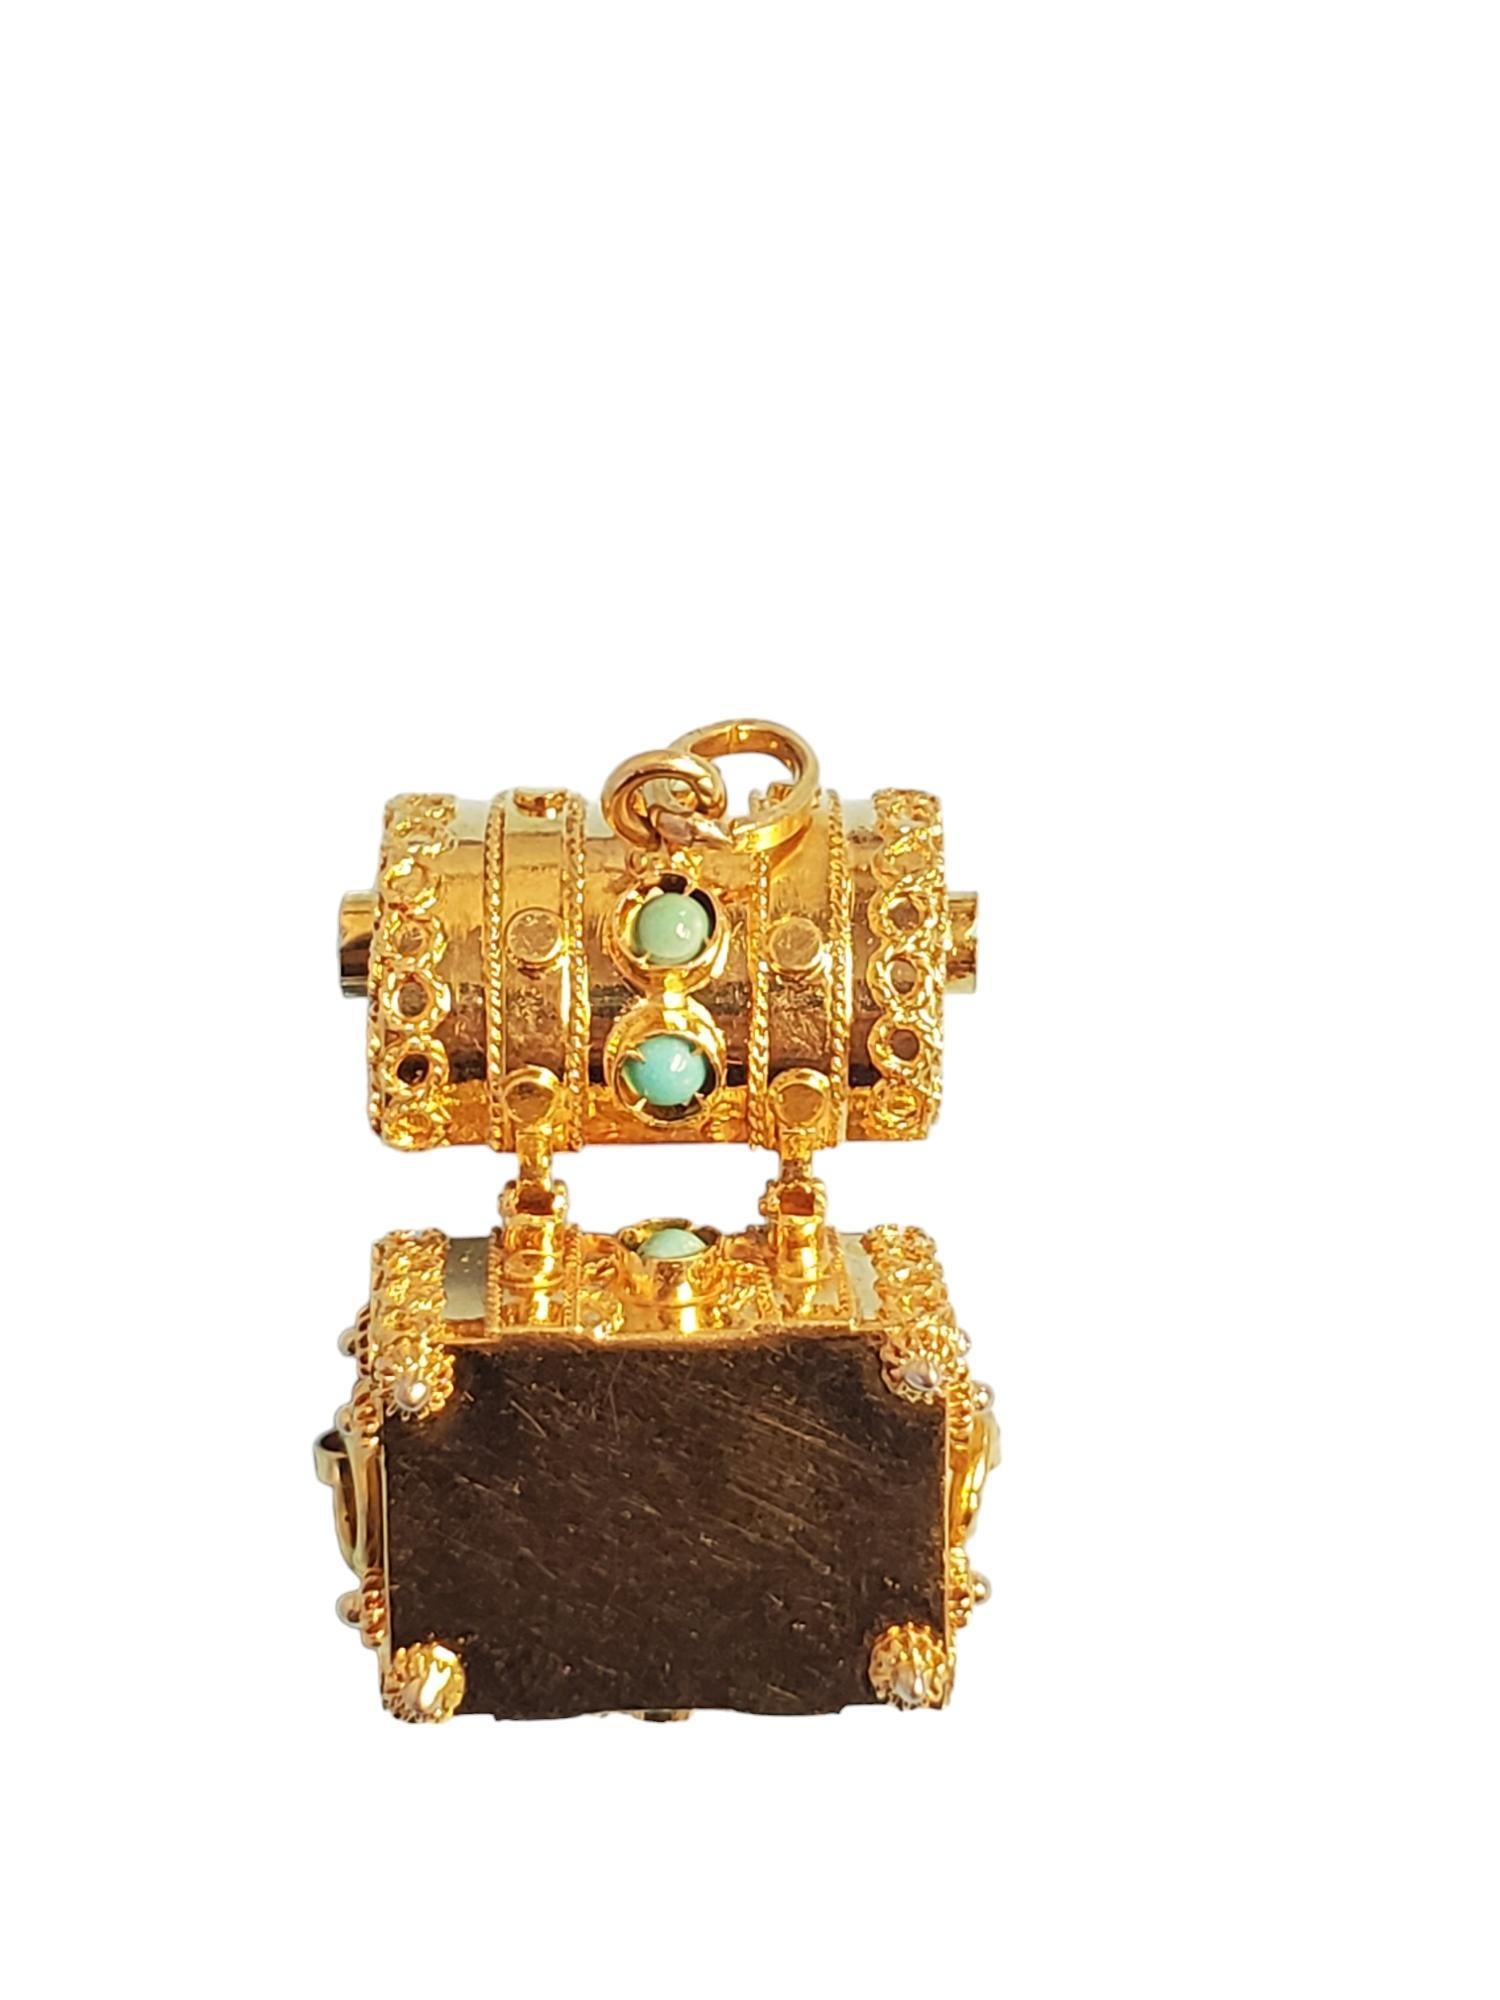 Round Cut Vintage Treasure Chest Charm Pendant 18k Yellow Gold Turquoise Color Stones For Sale